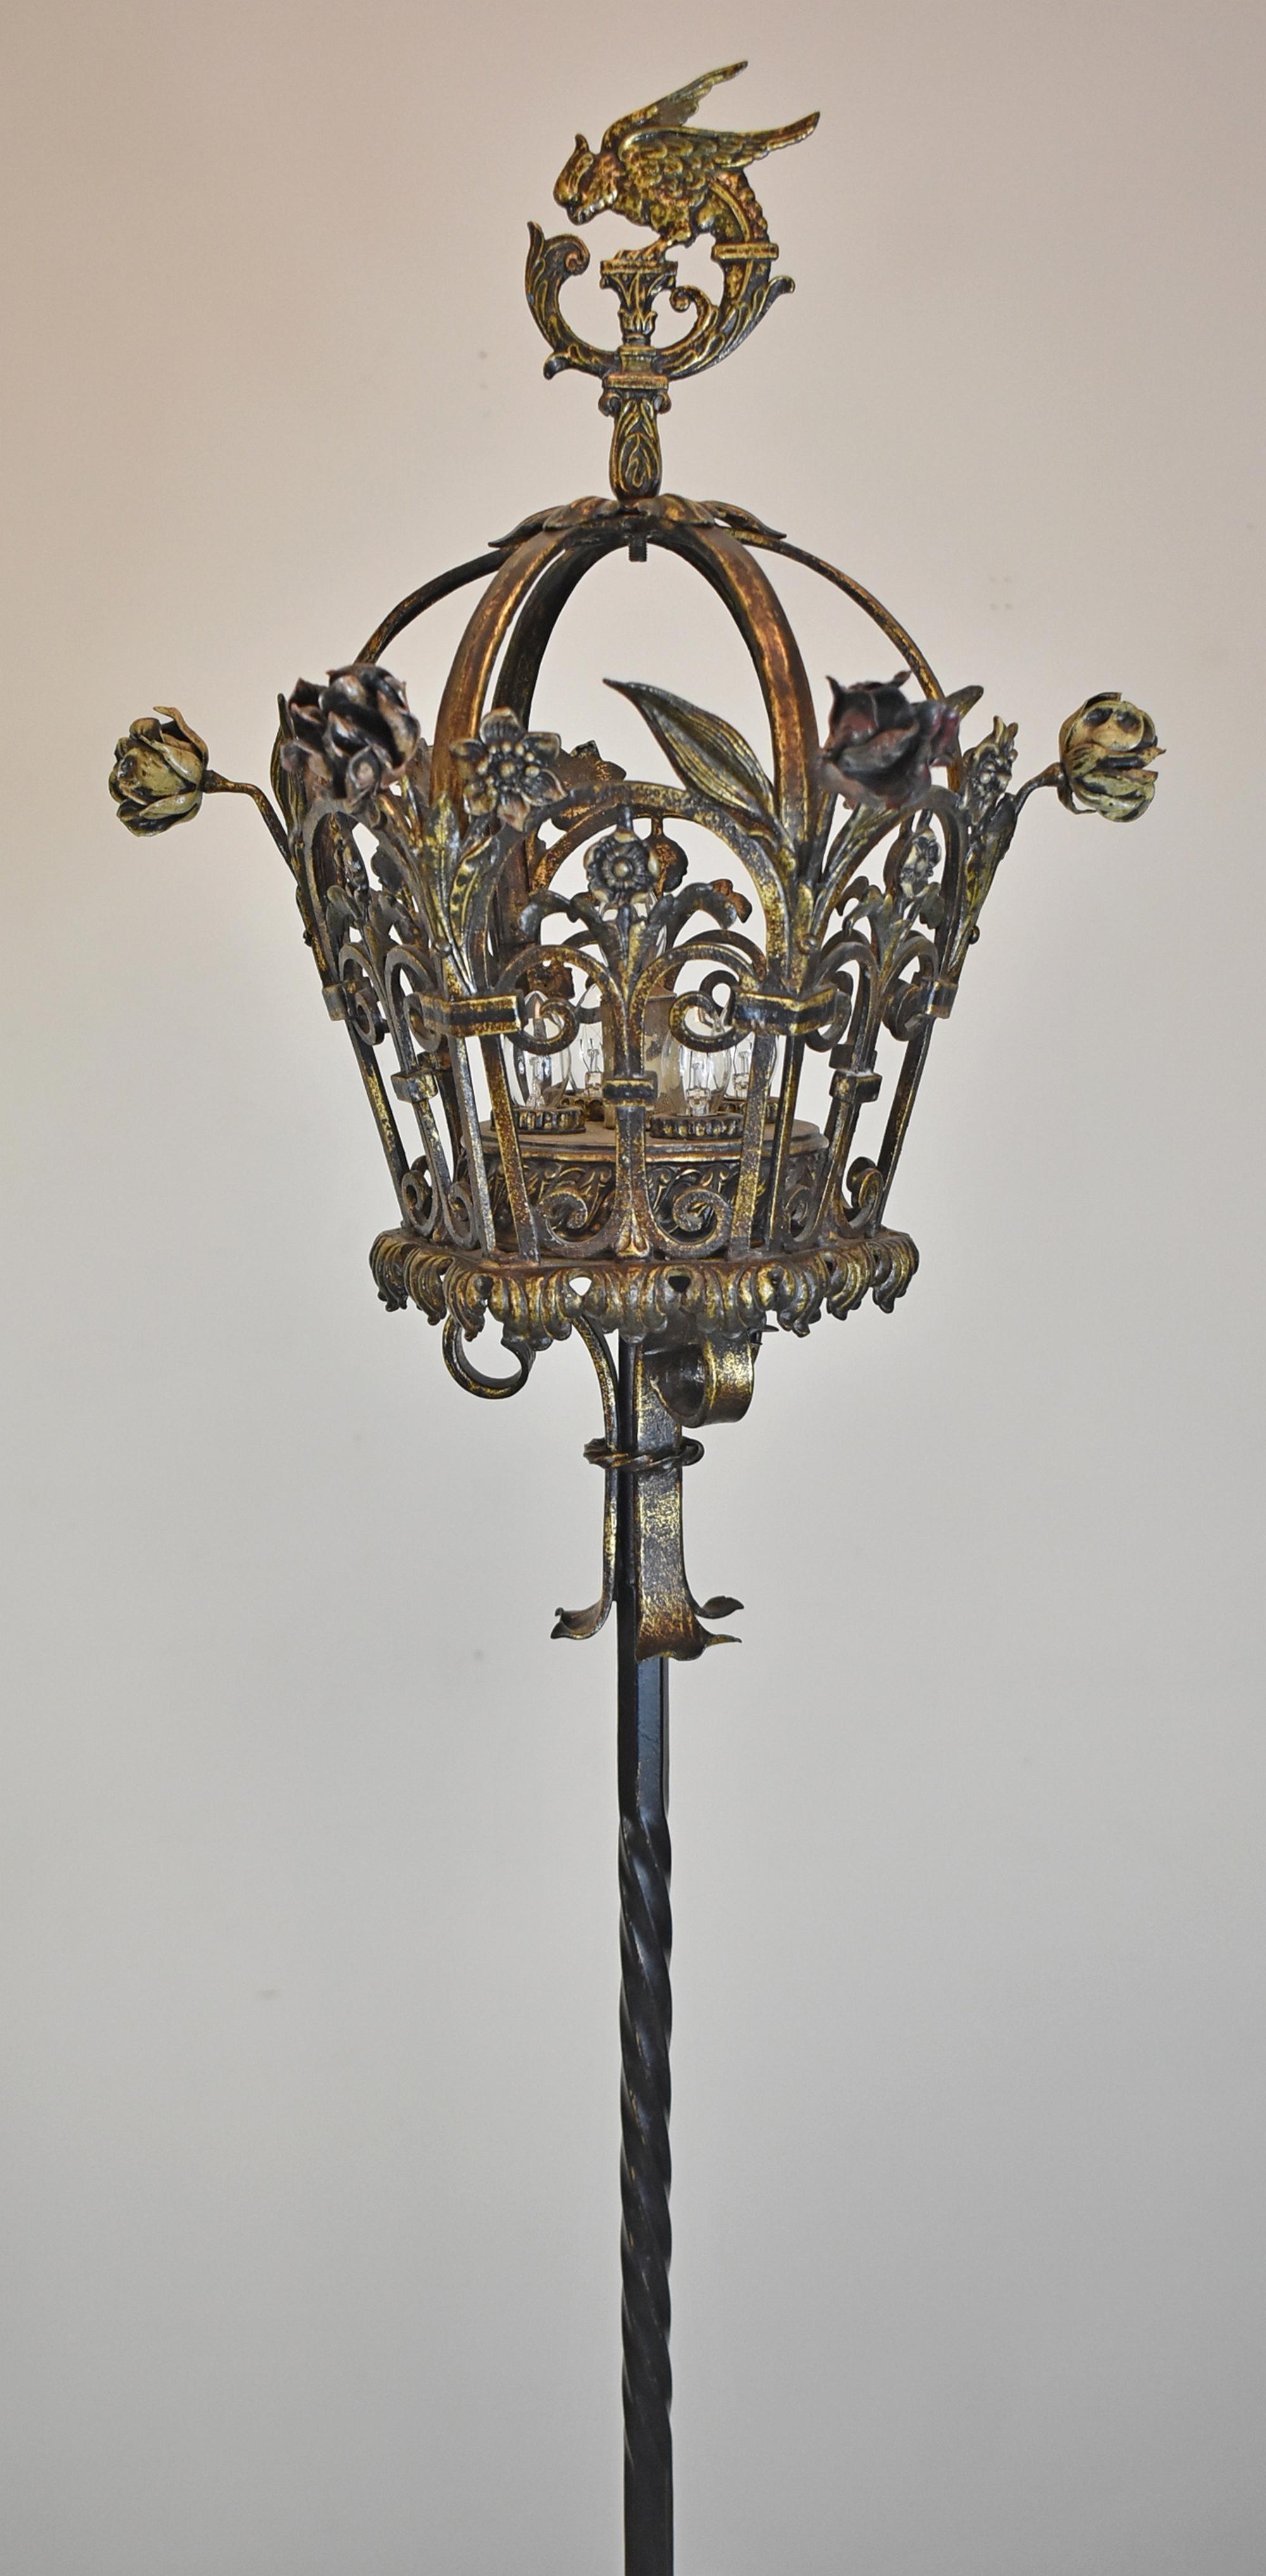 Pair of gold and charcoal wrought iron torchier floor lamps circa 1910s-1920s. Figured marble base. Bird cage top with enameled floral details. Parrot finials. Each light takes five bulbs.